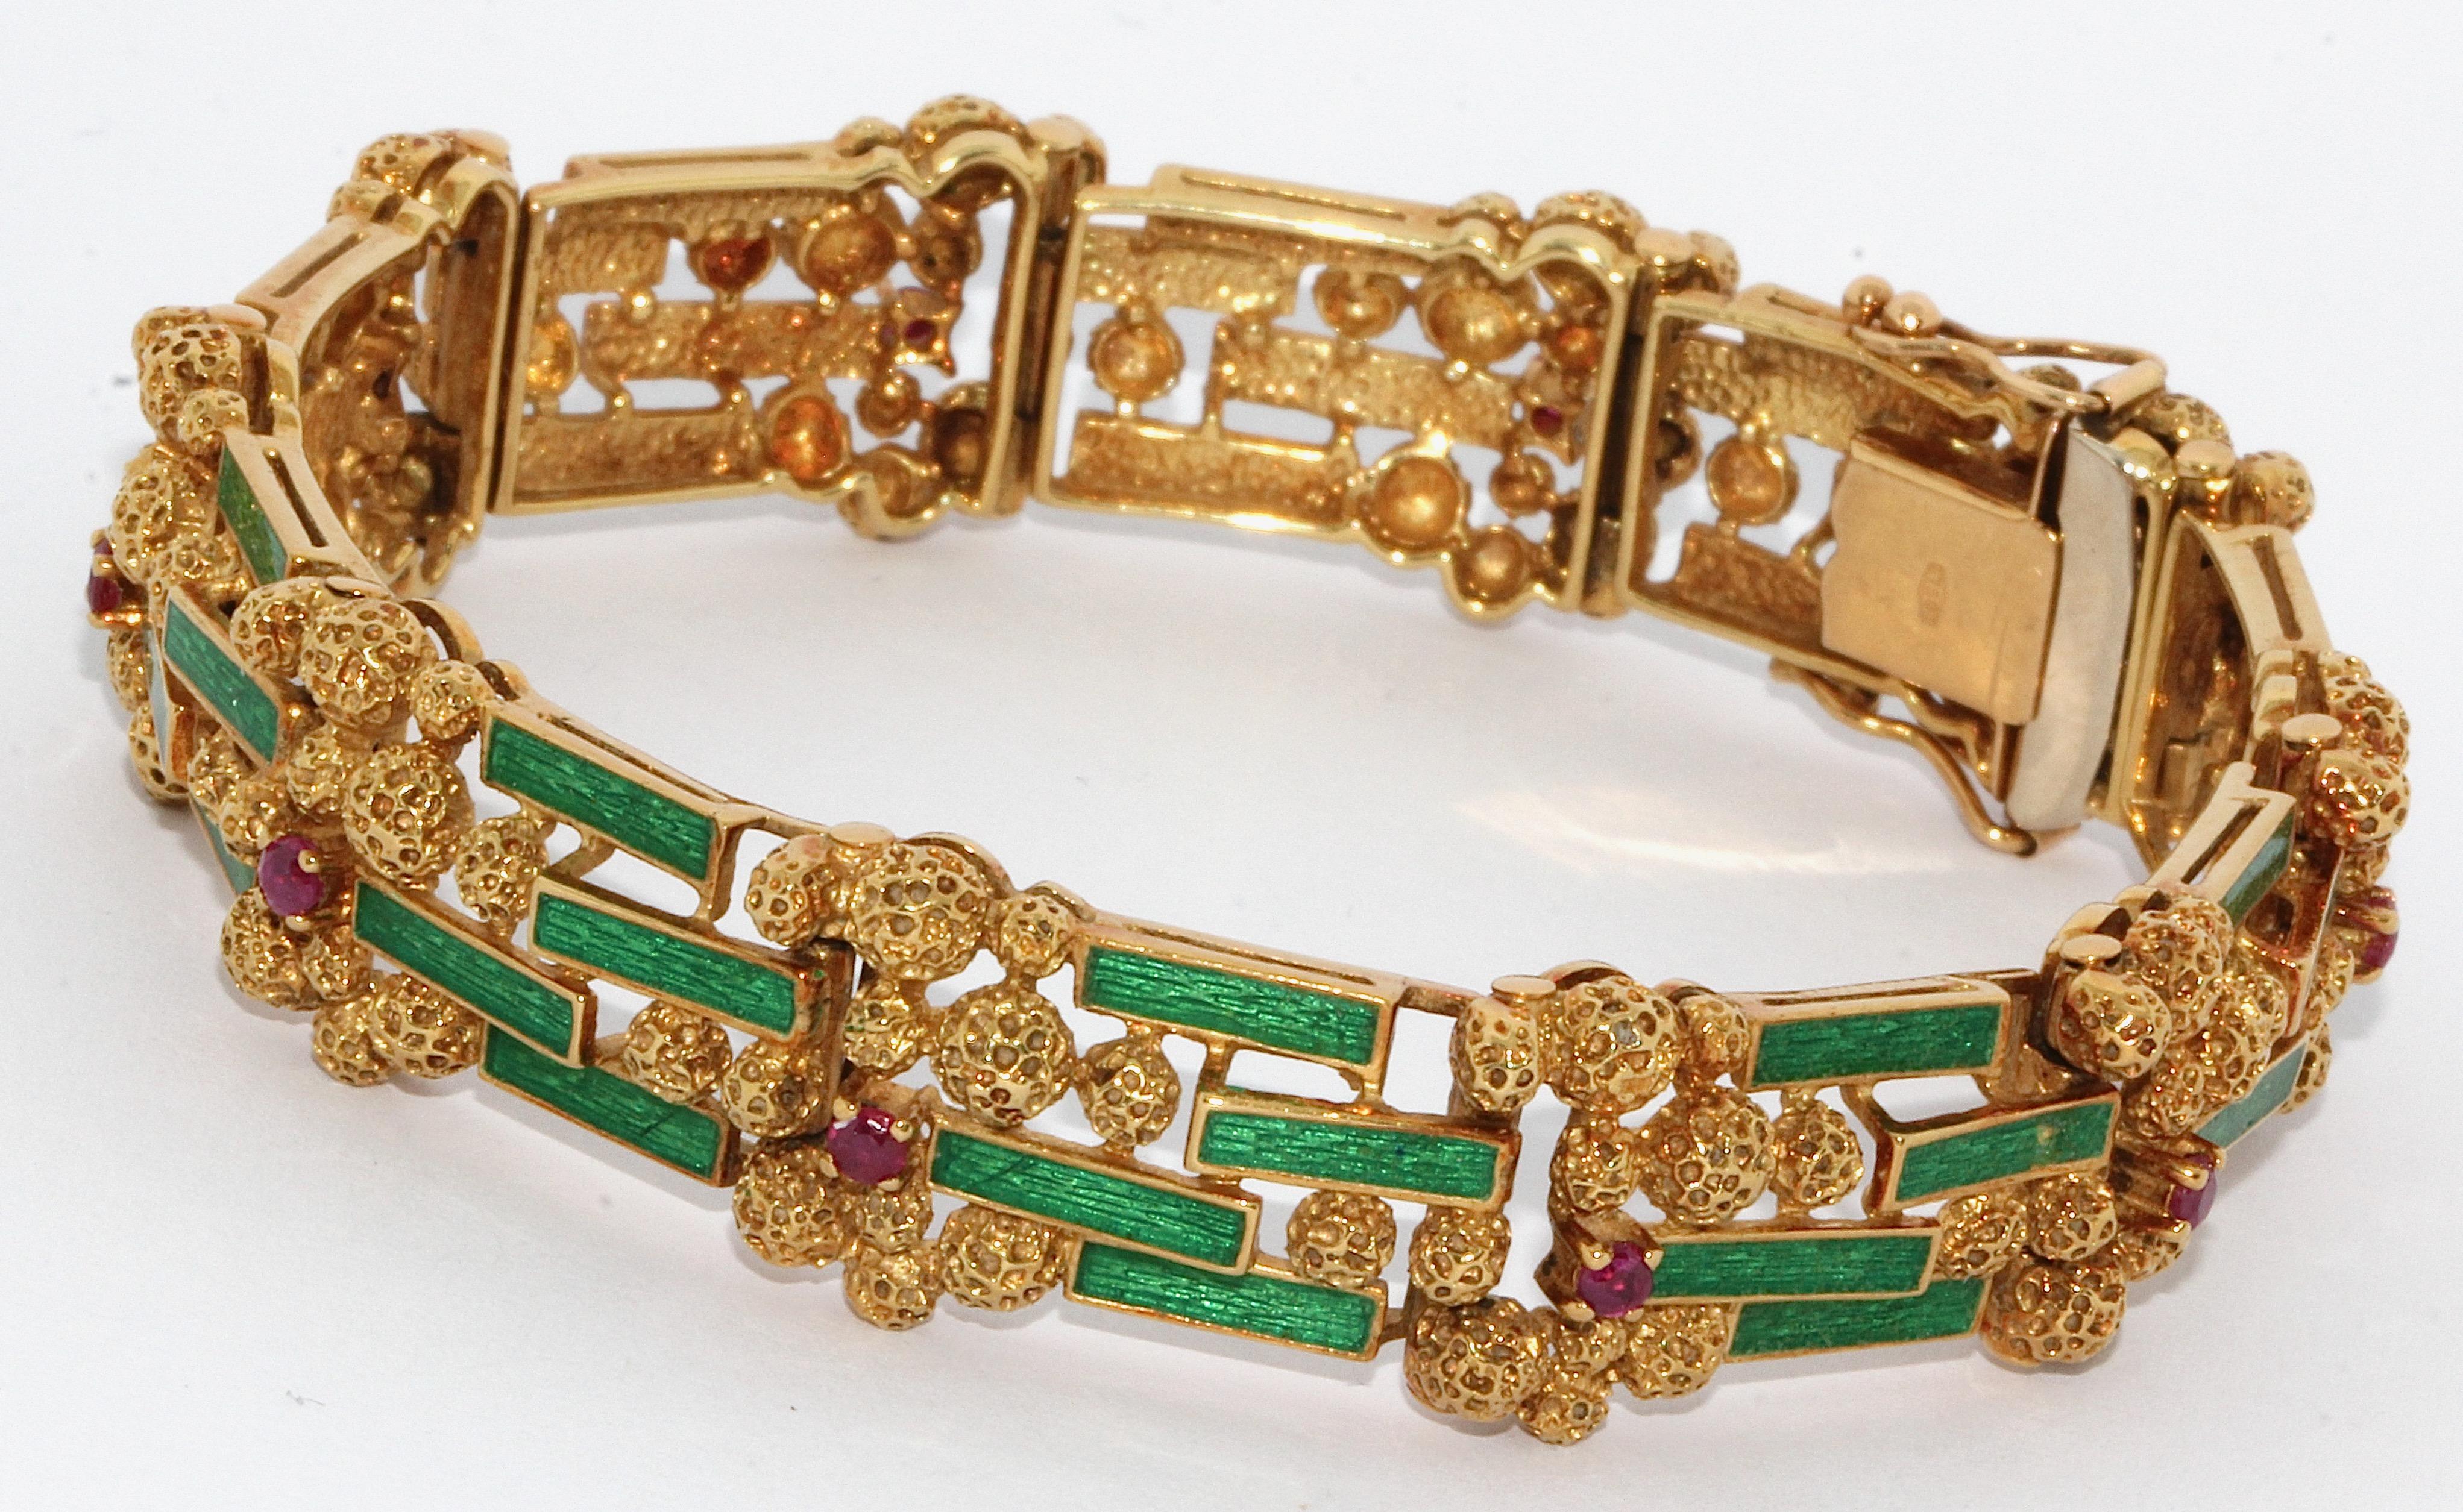 Ladies nugget gold bracelet, 18 carat, set with green enamel and rubies.

Including certificate of authenticity.